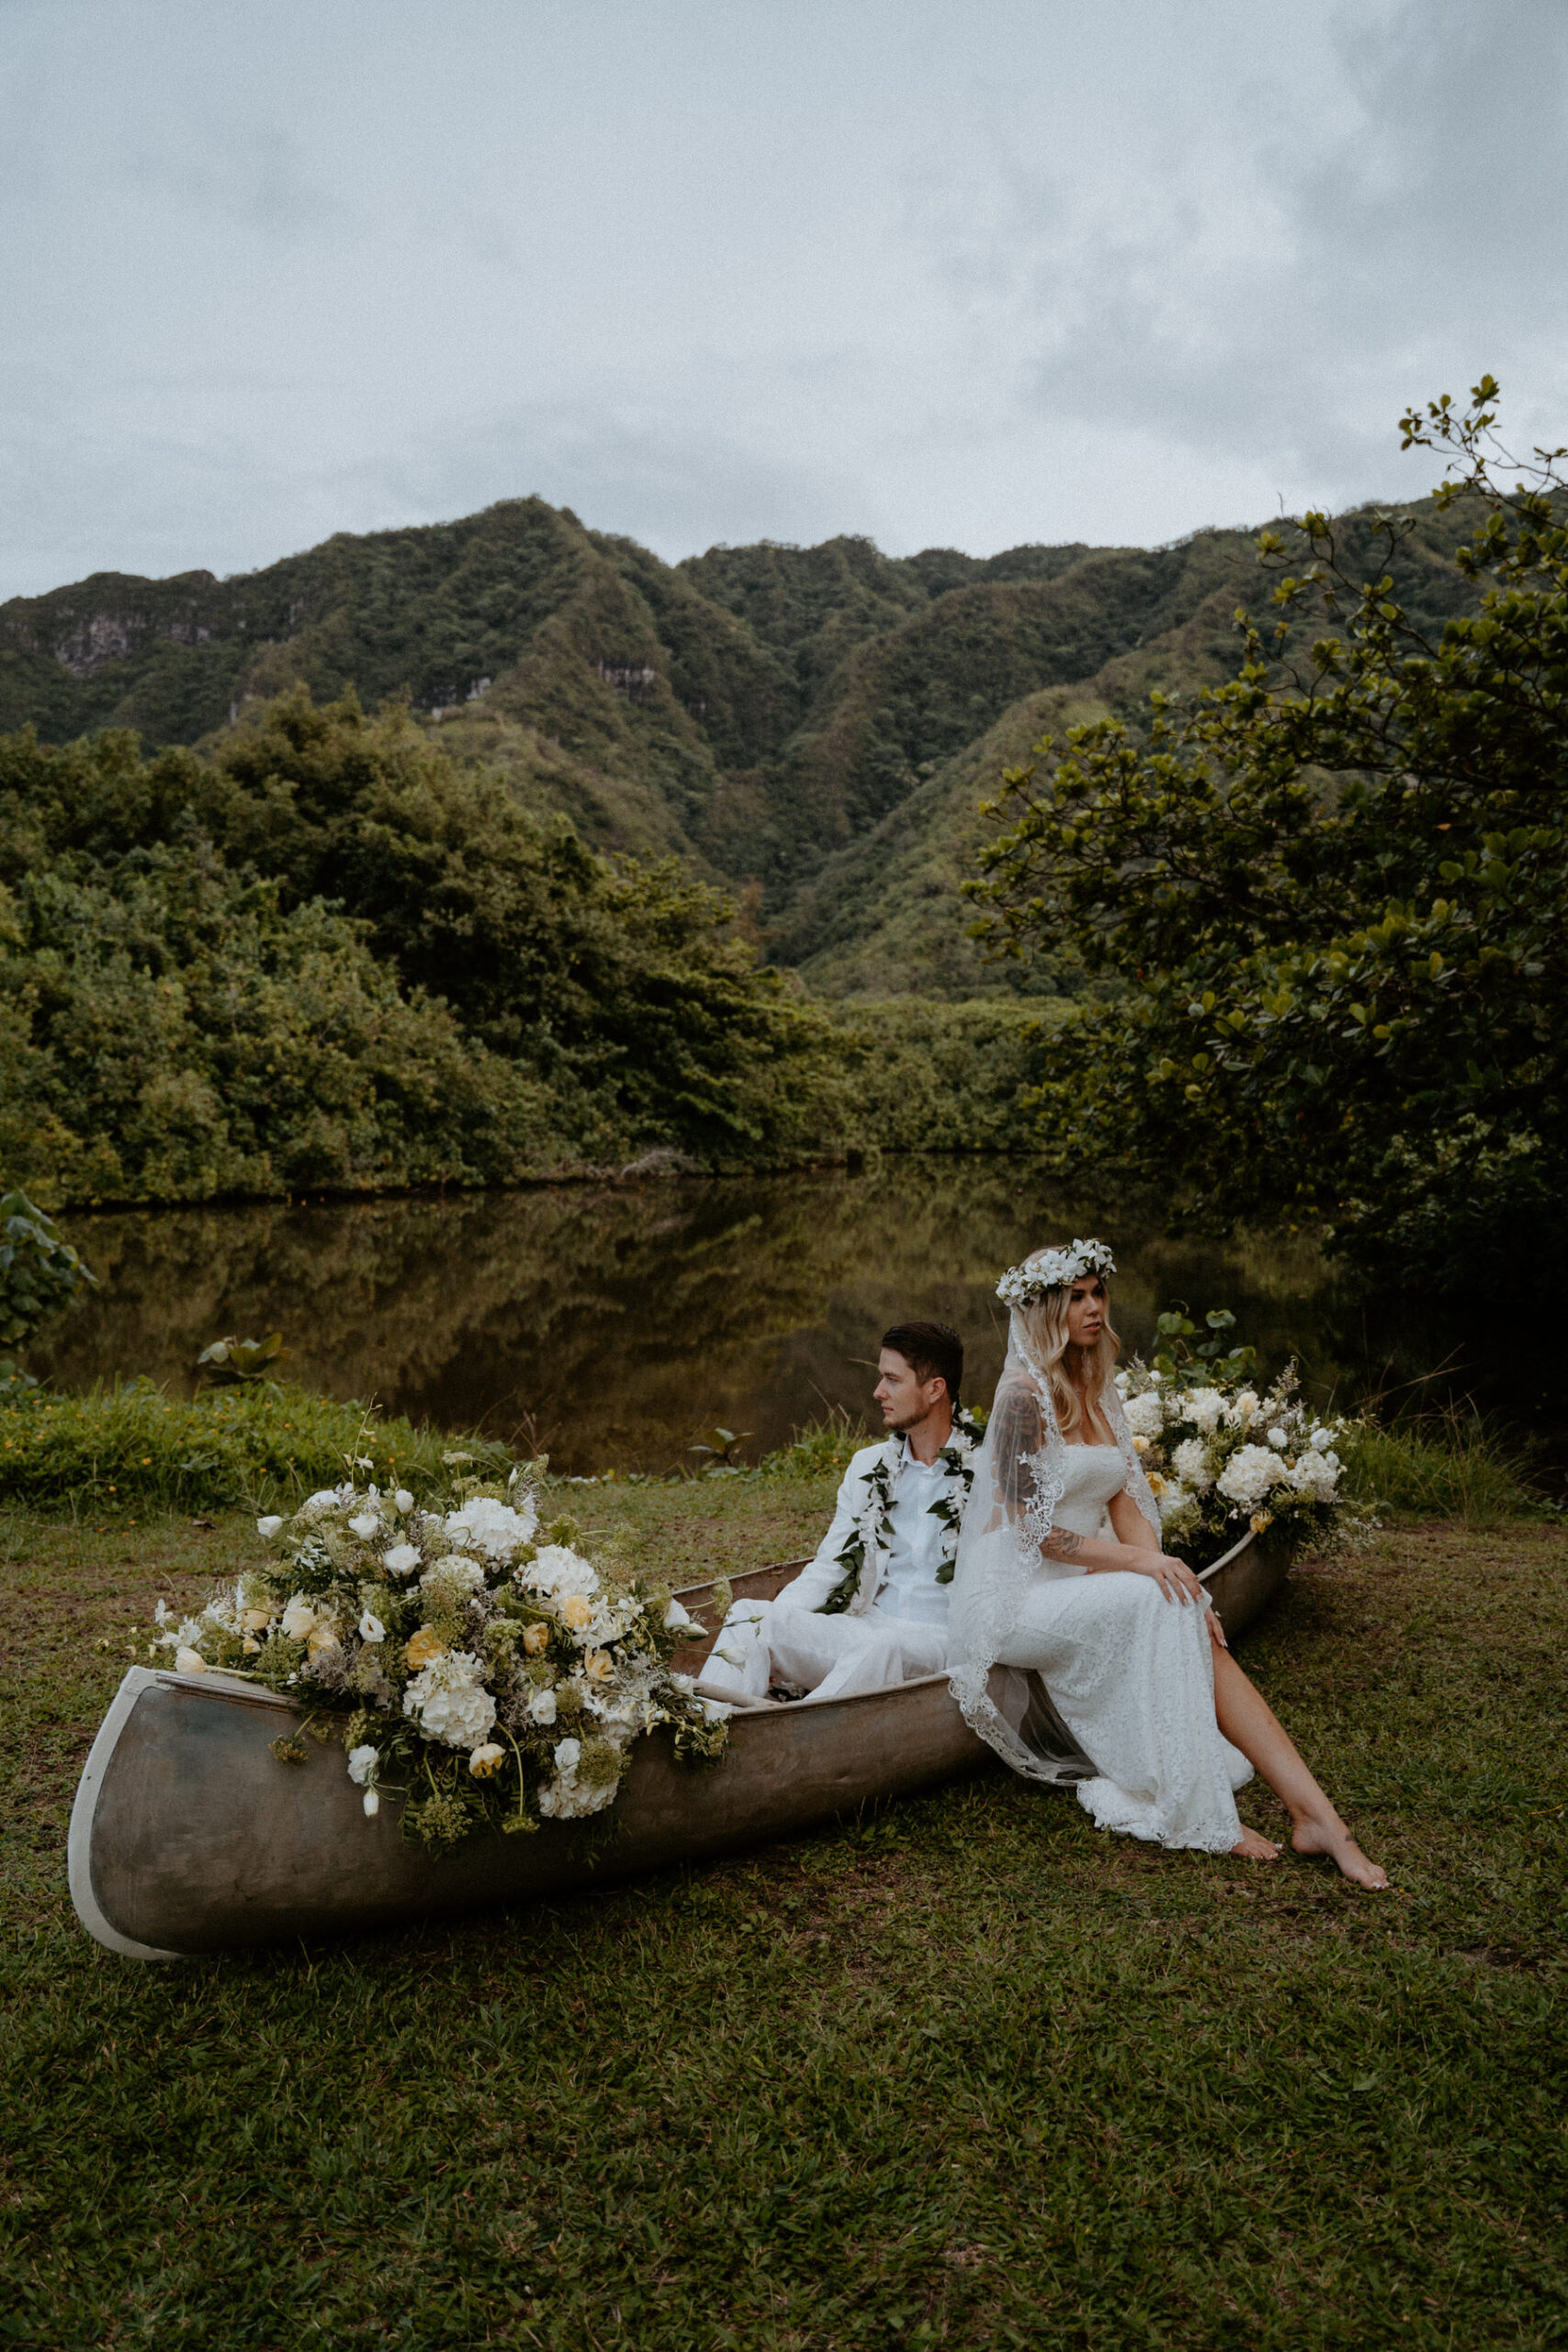 Bride and groom pose in floral filled canoe.